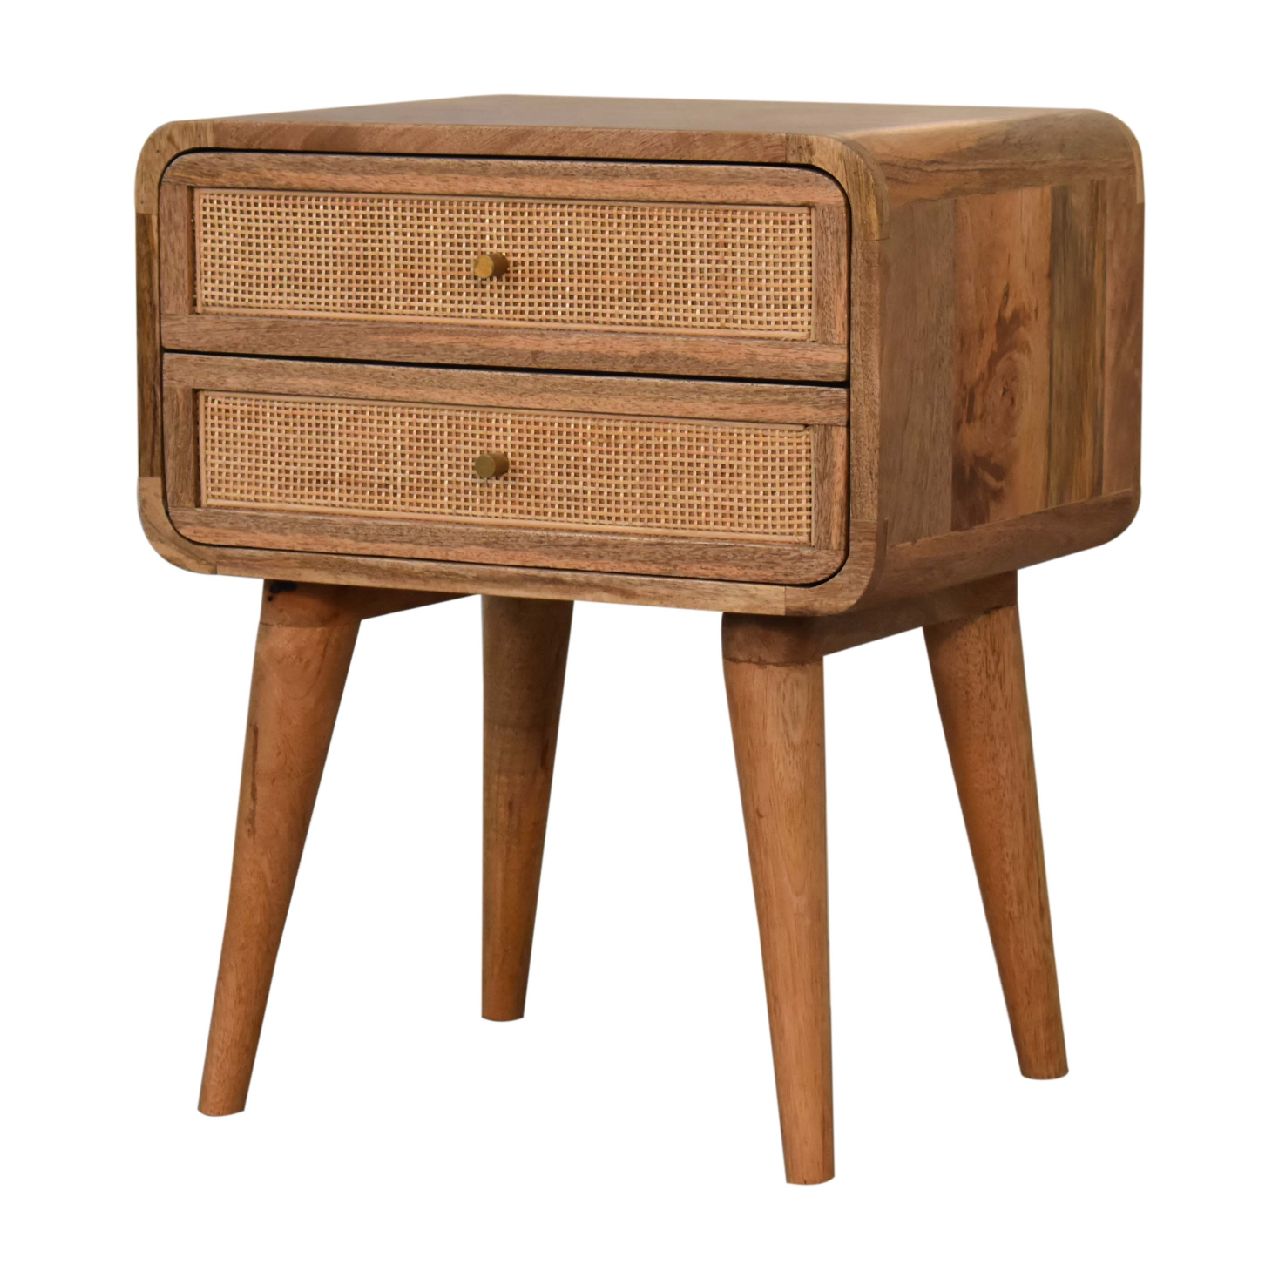 Handmade solid wood Paloma 2 drawer bedside table with woven rattan drawer frontals | MalletandPlane.com